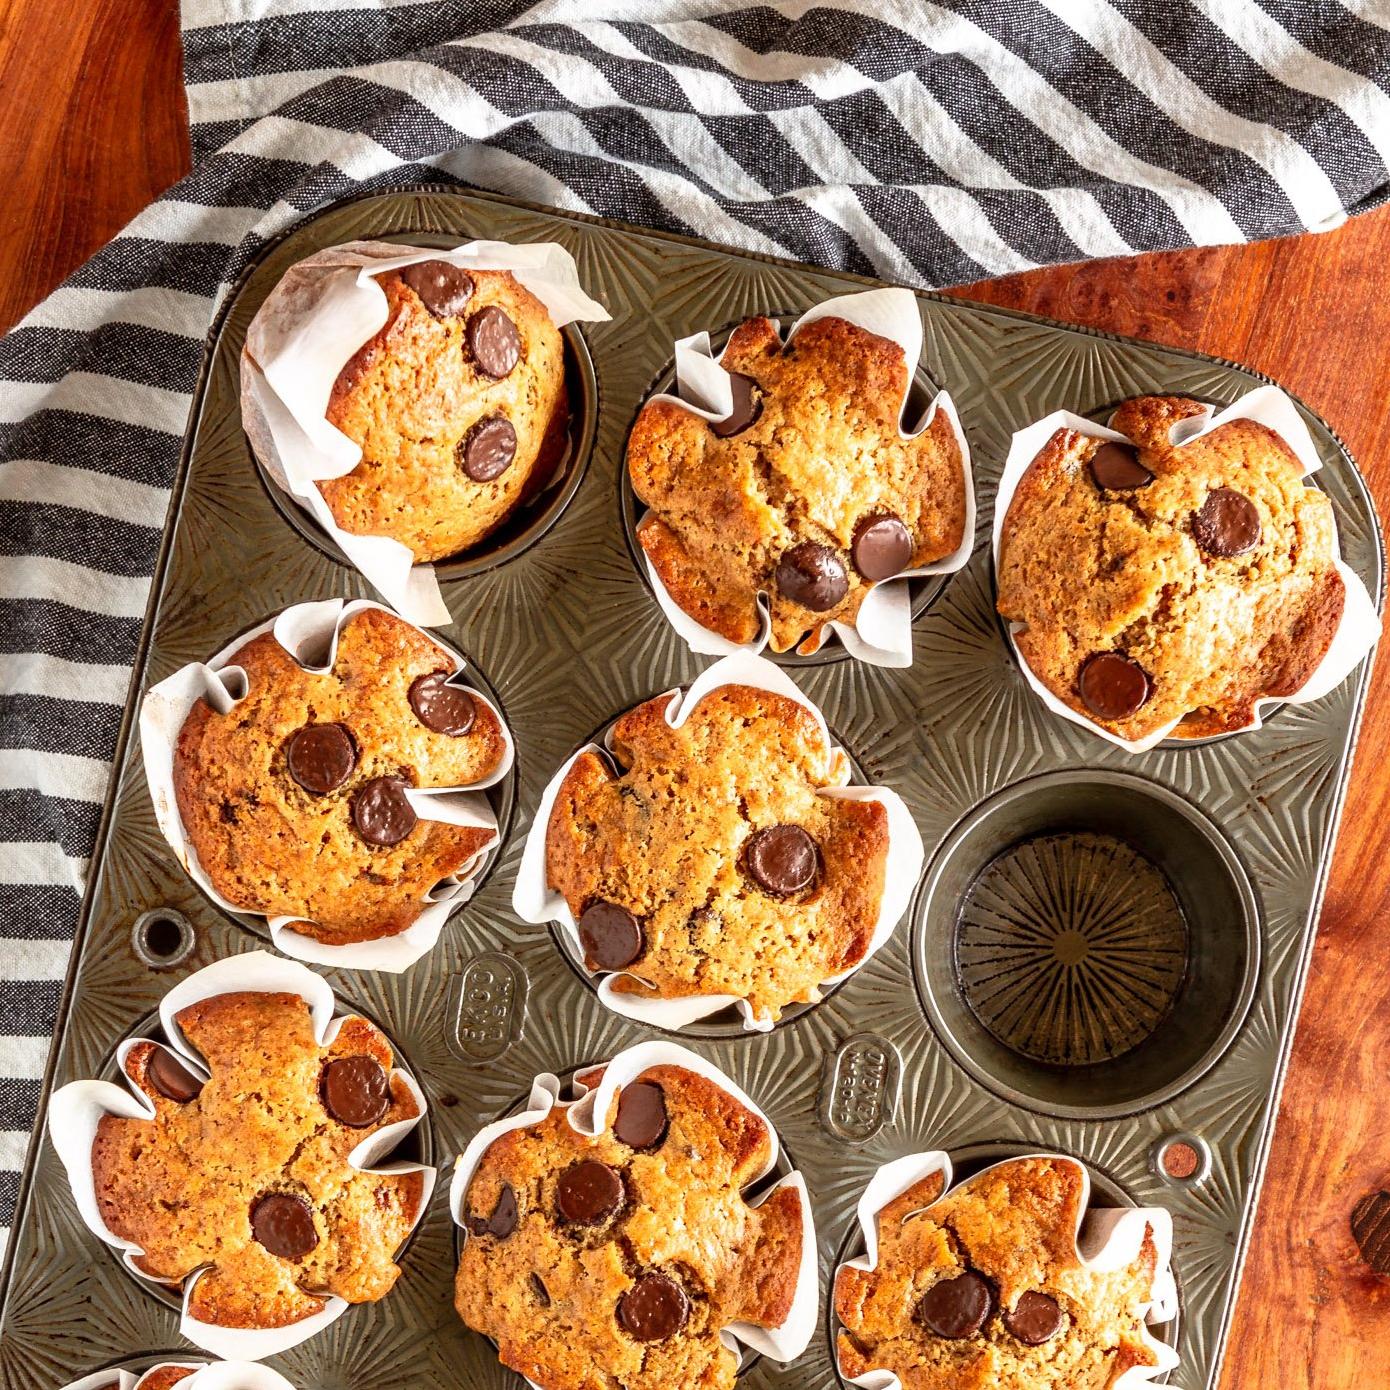  What’s better than a chocolate chip muffin? An Espresso Chip Muffin!